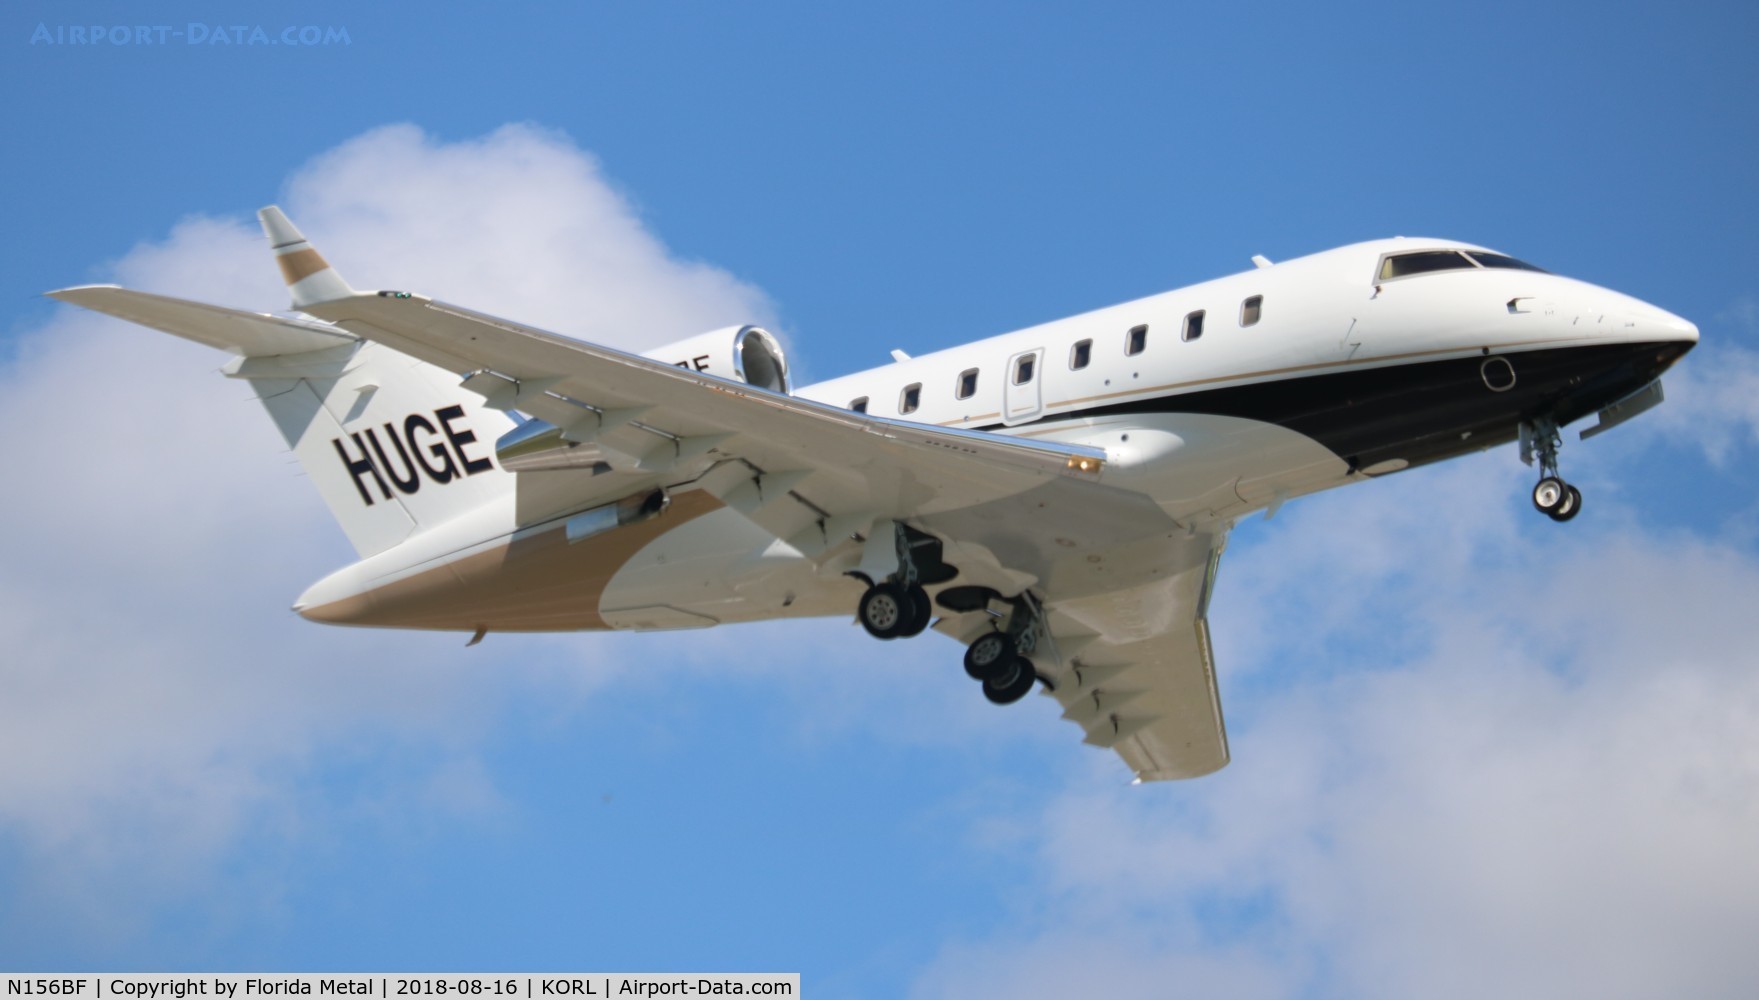 N156BF, 2012 Bombardier Challenger 605 (CL-600-2B16) C/N 5912, Challenger 605 zx